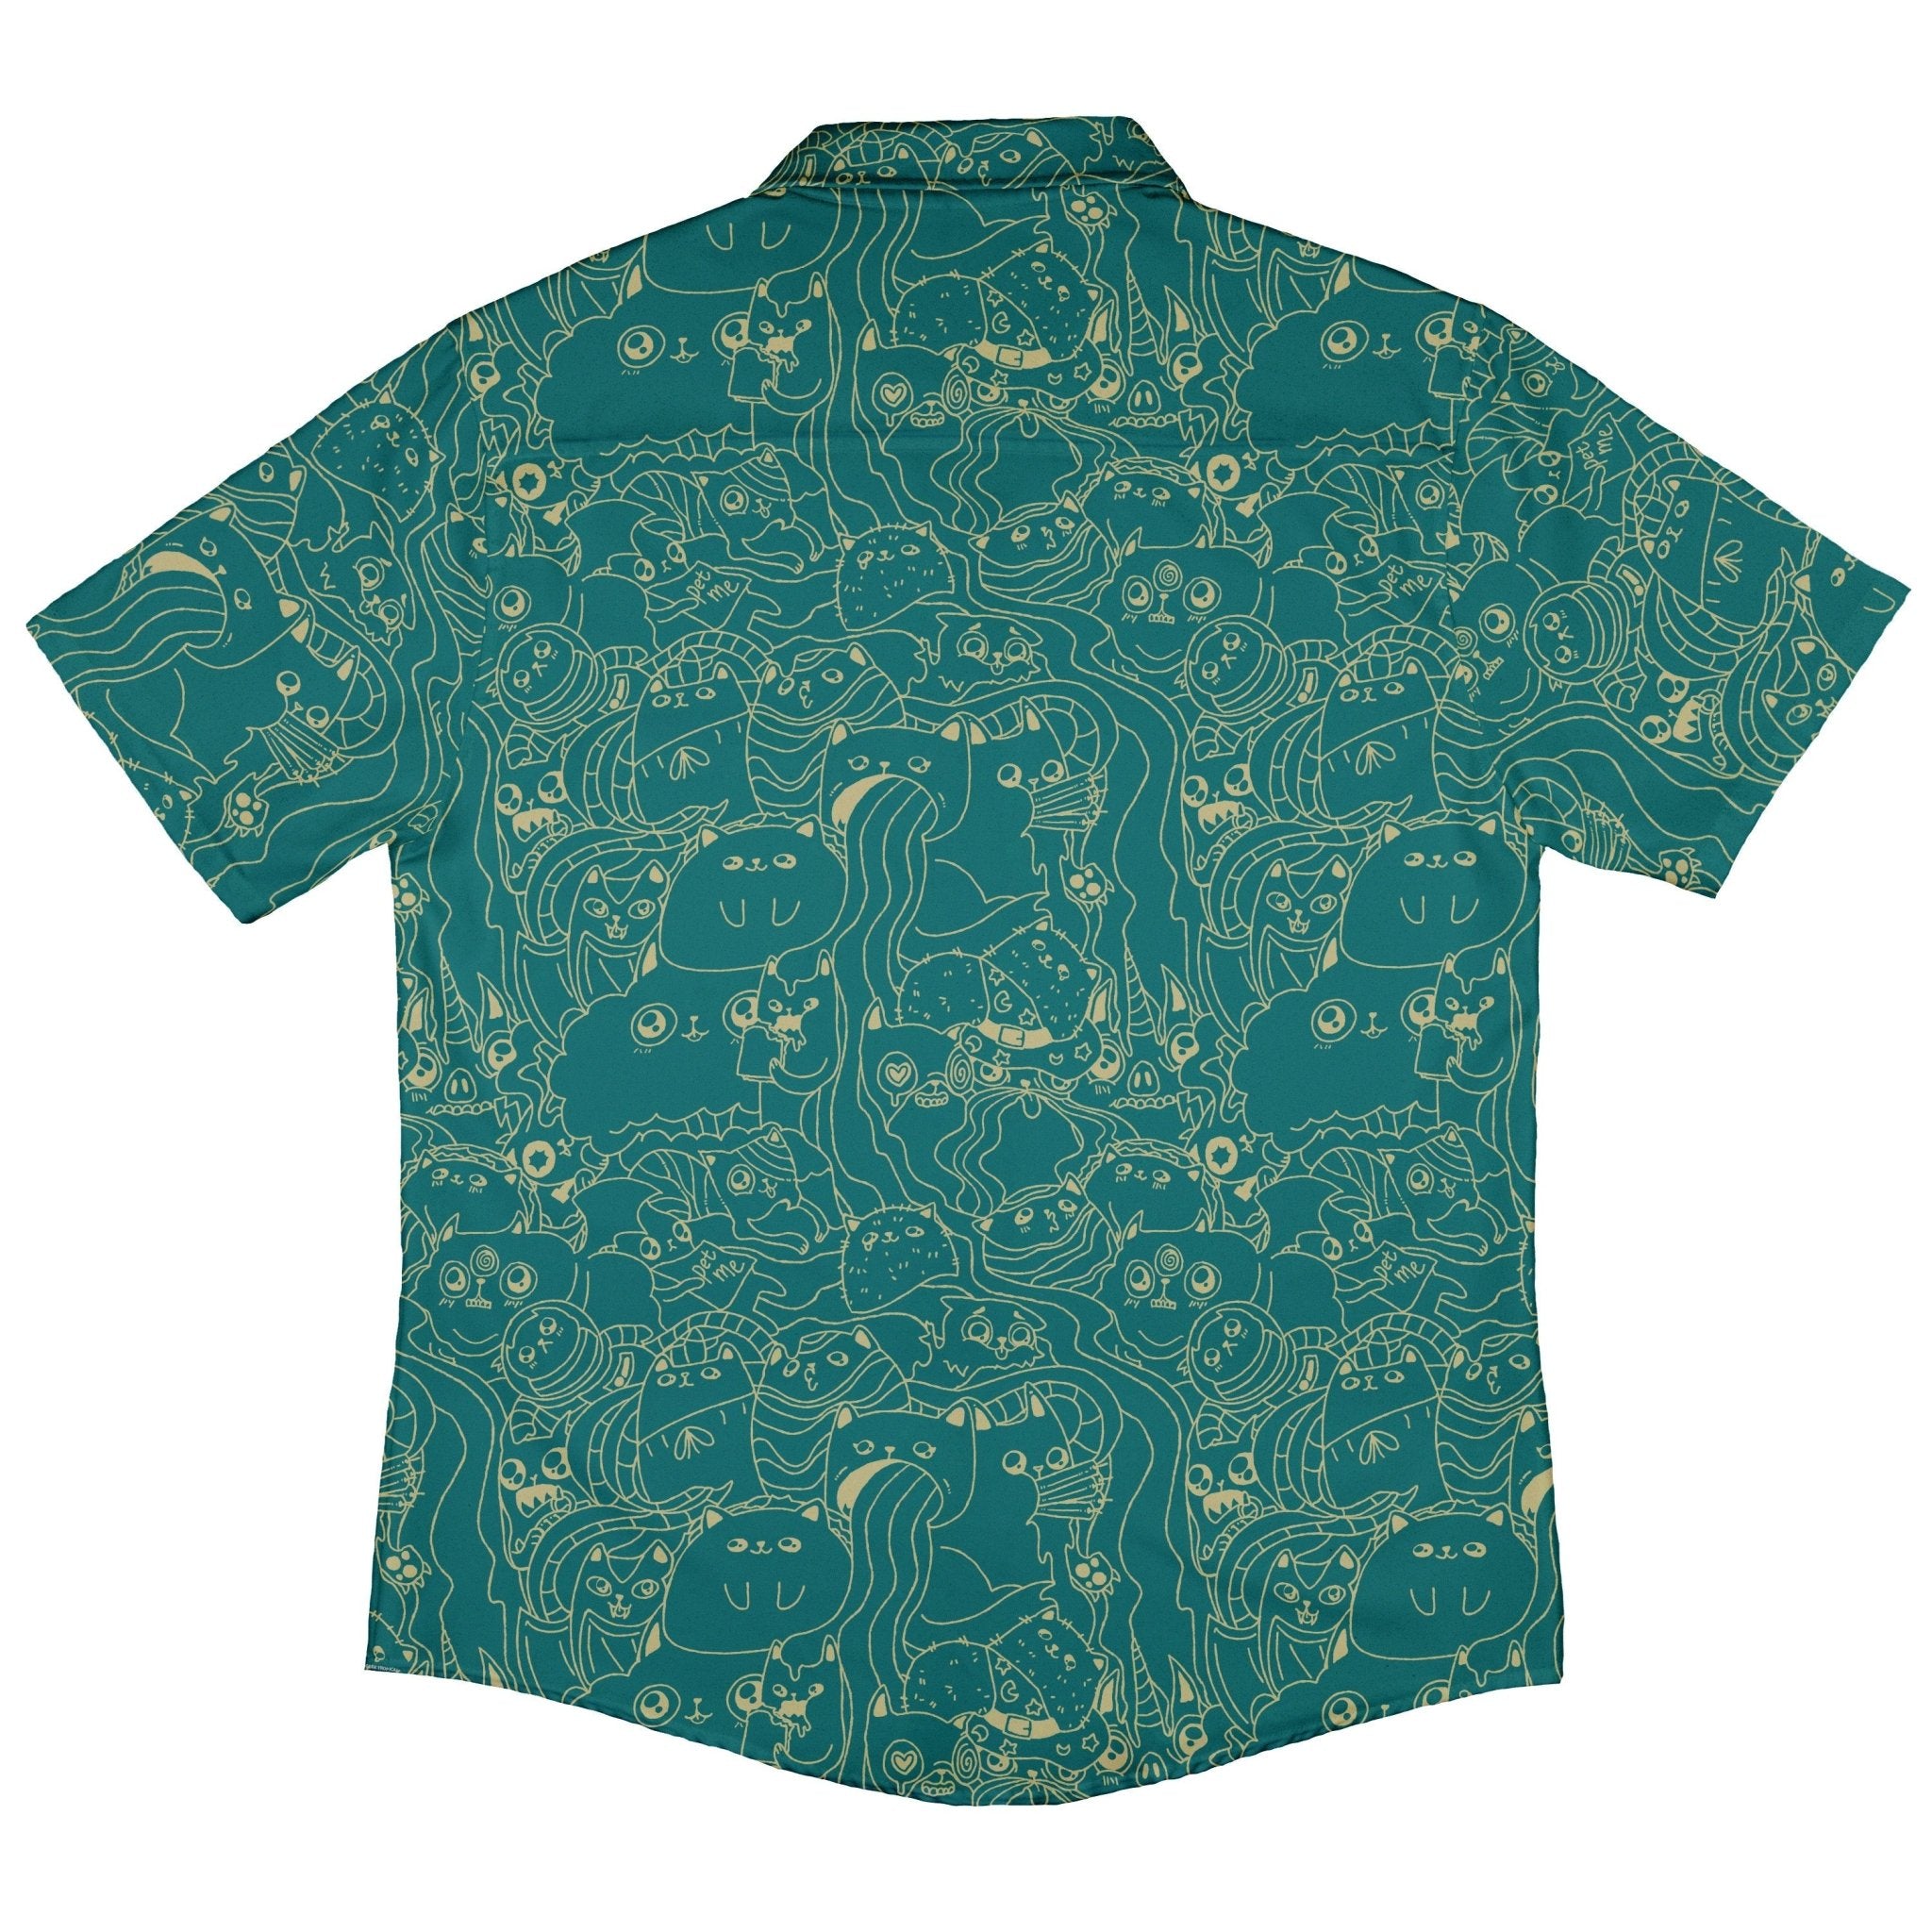 Exploding Kittens Mashup Mossy Teal Button Up Shirt - adult sizing - Animal Patterns - board game print